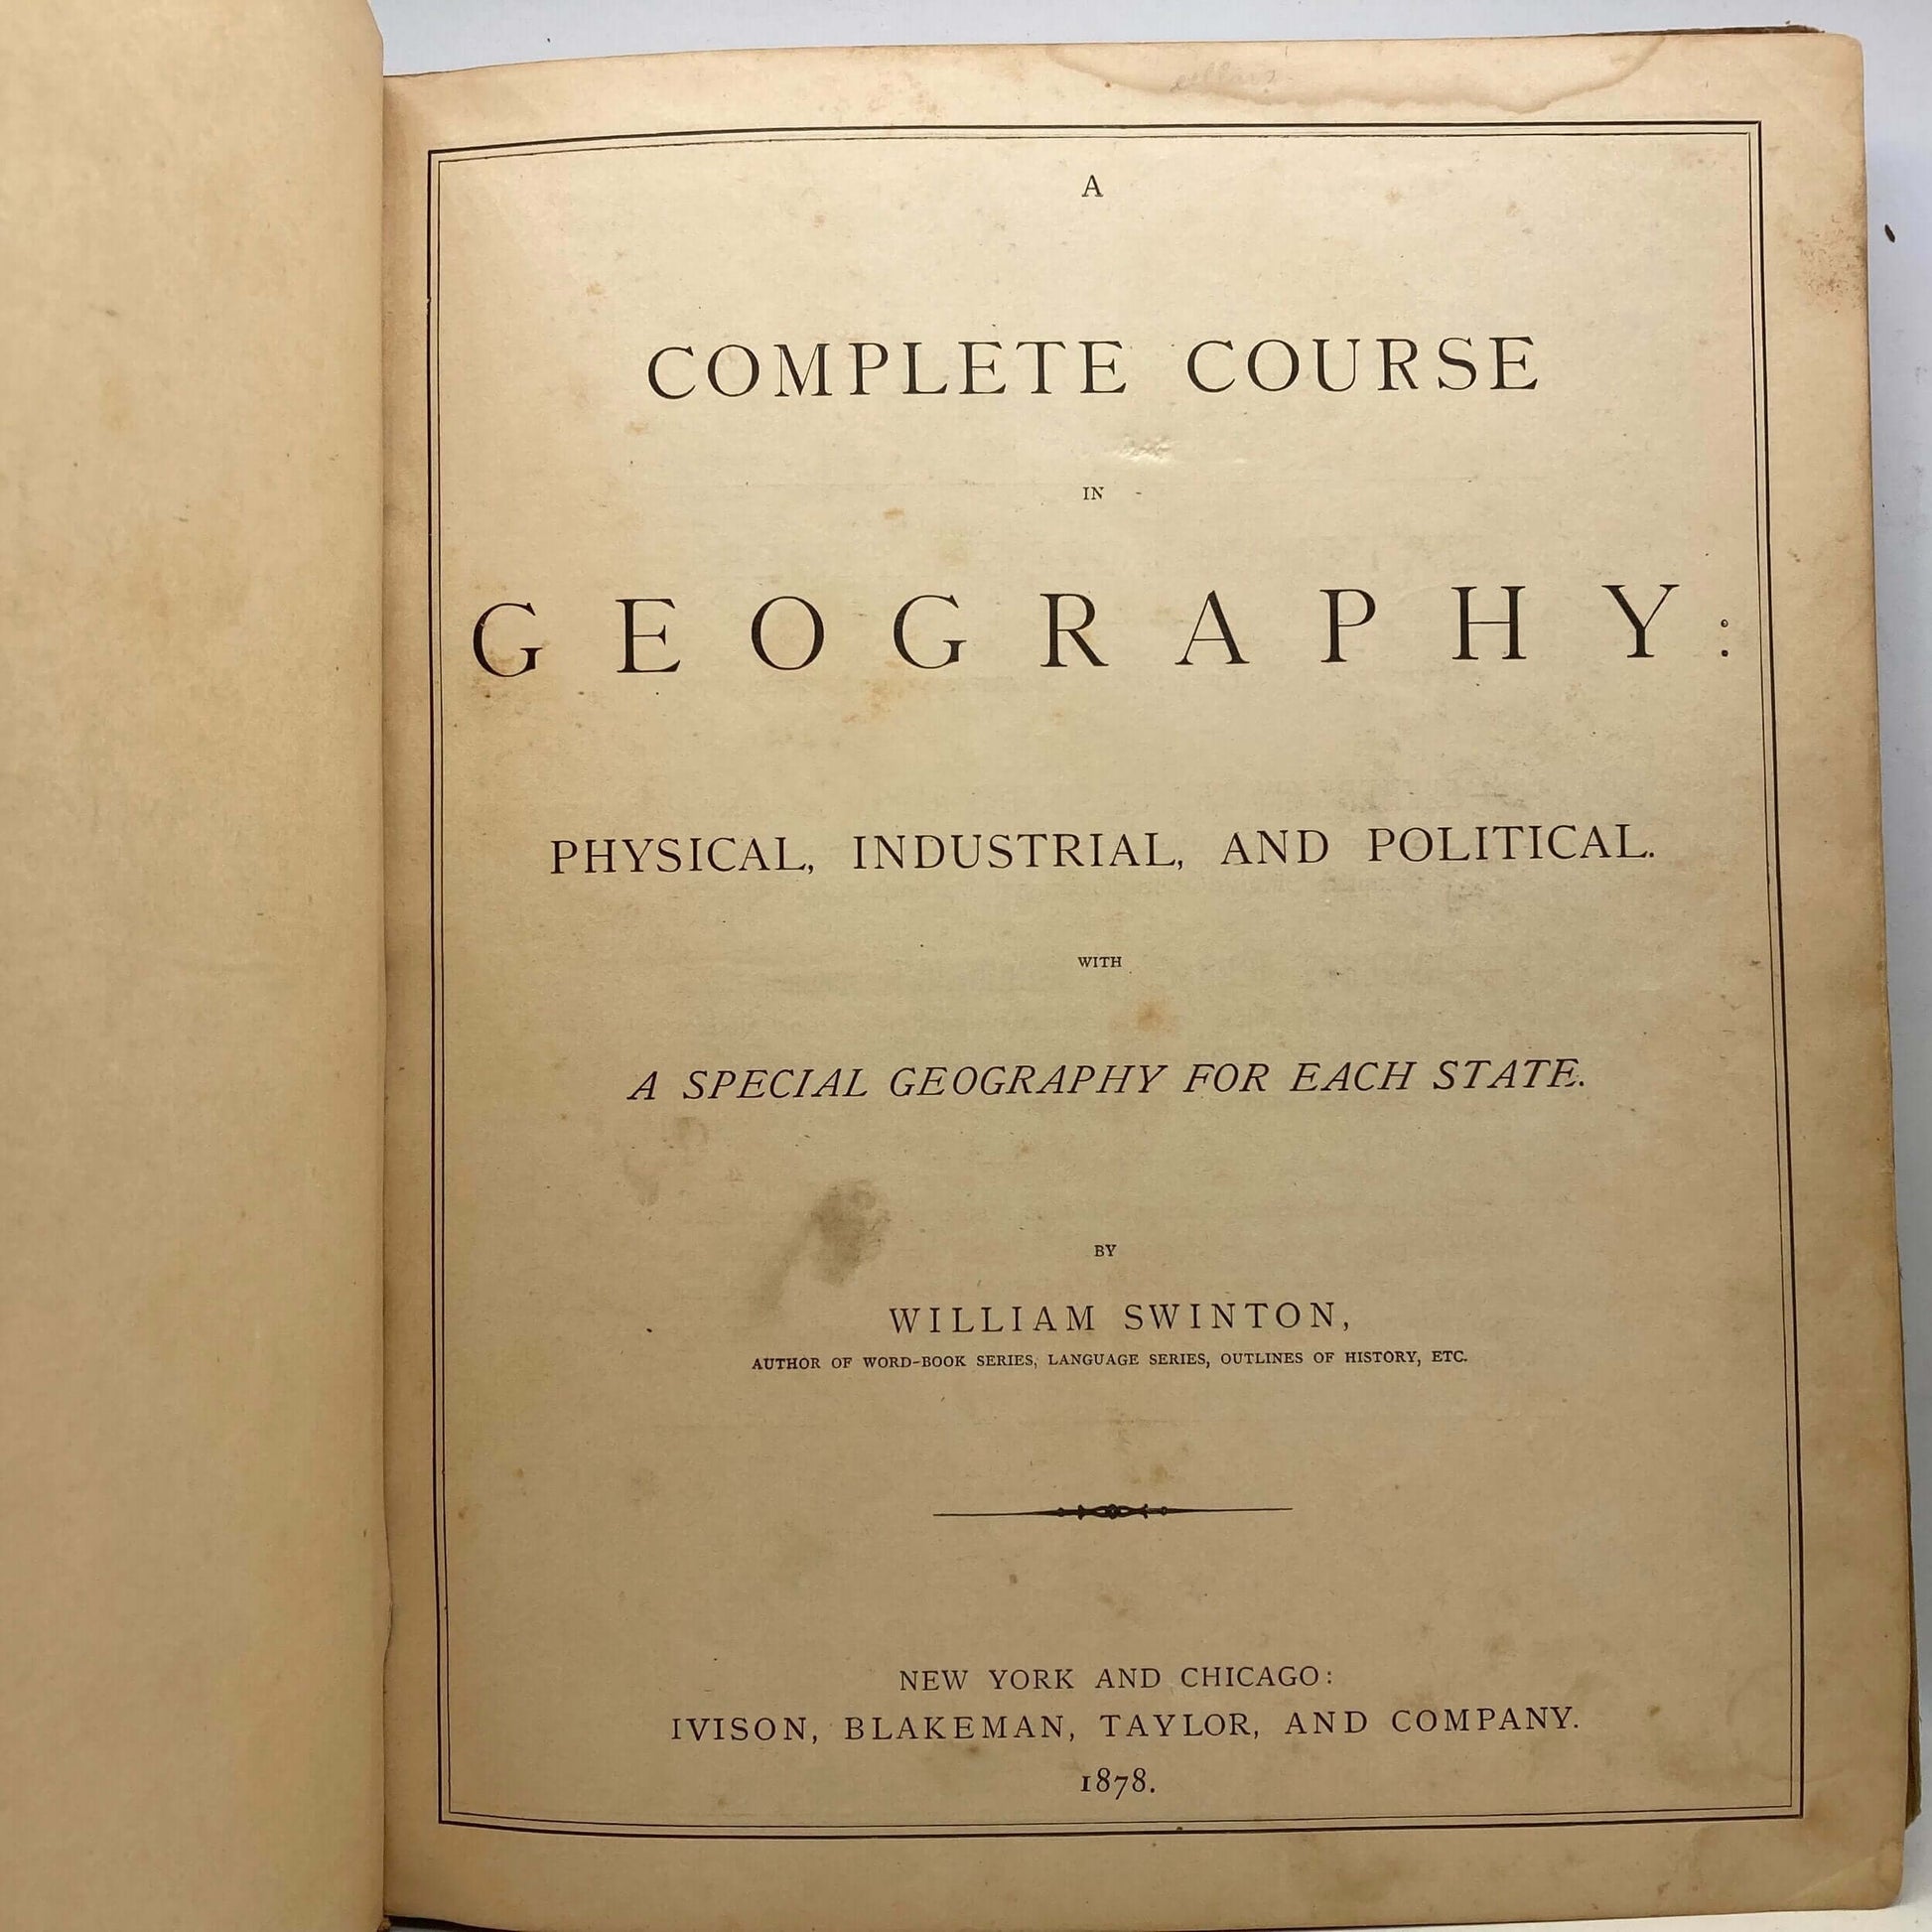 "Swinton's Complete Course in Geography" [Ivison, Blakeman, Taylor & Co, 1878] Atlas - Buzz Bookstore